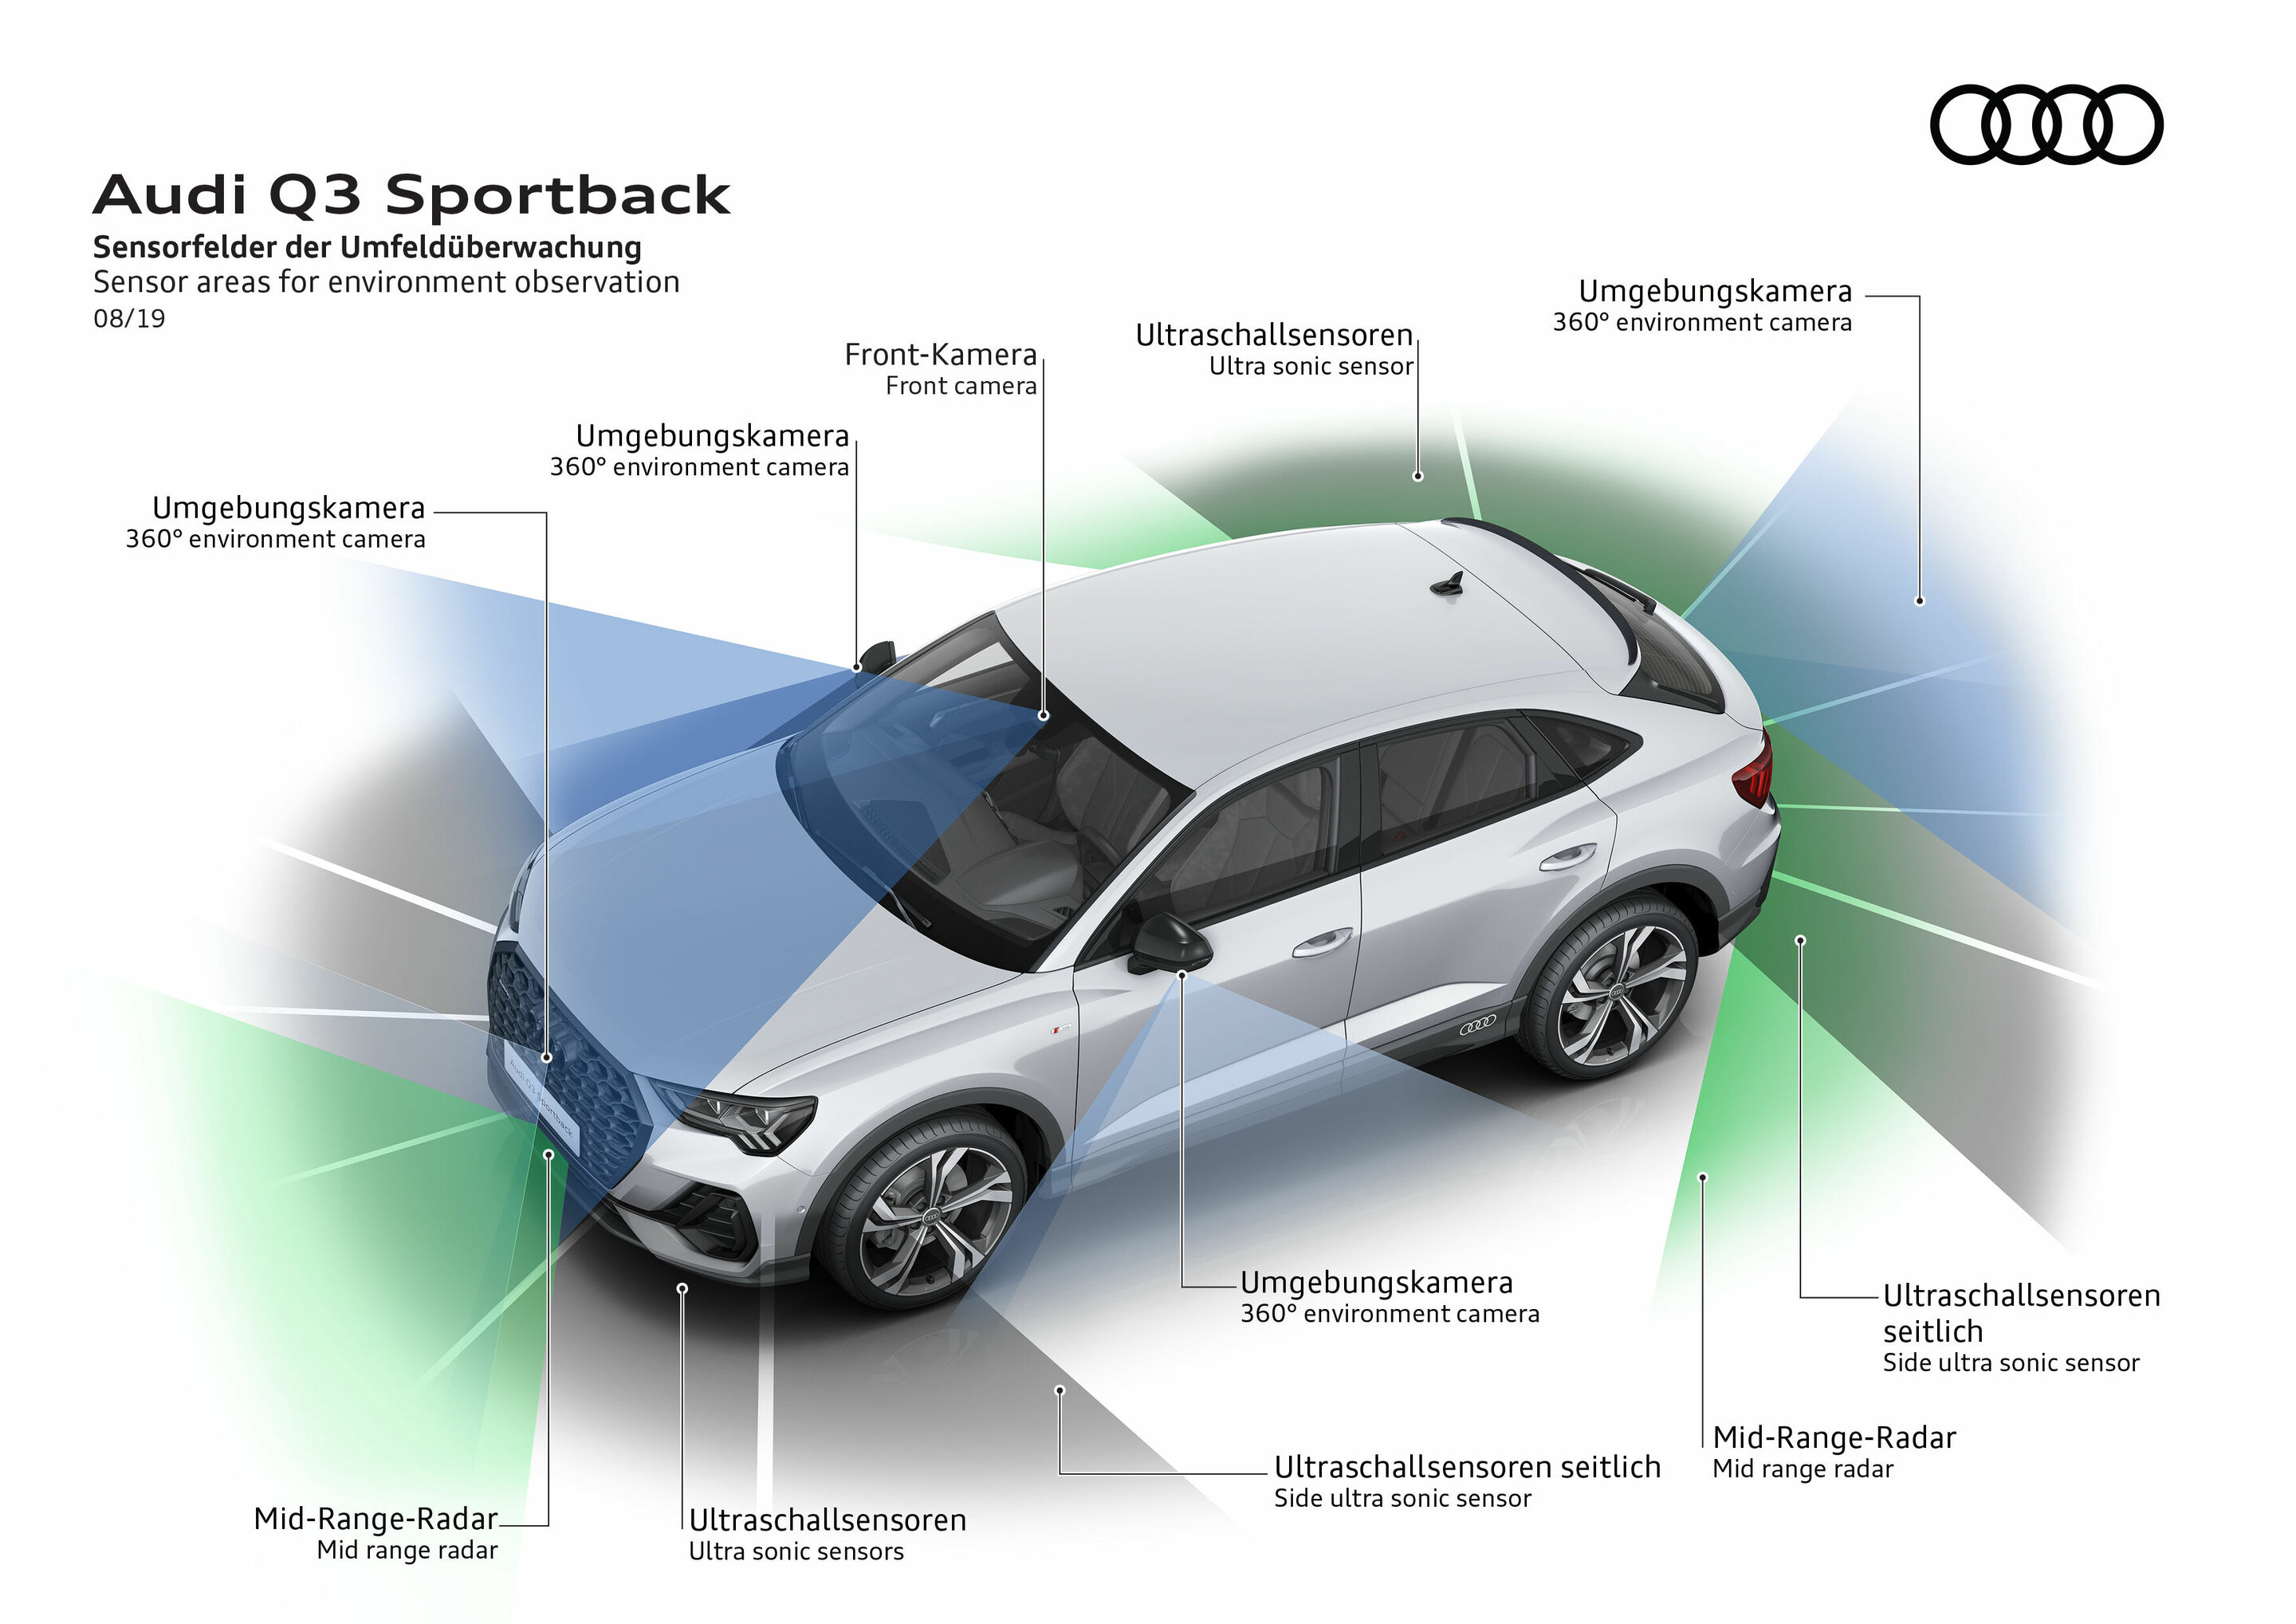 Audi's newest sensors are designed to save cyclists' lives